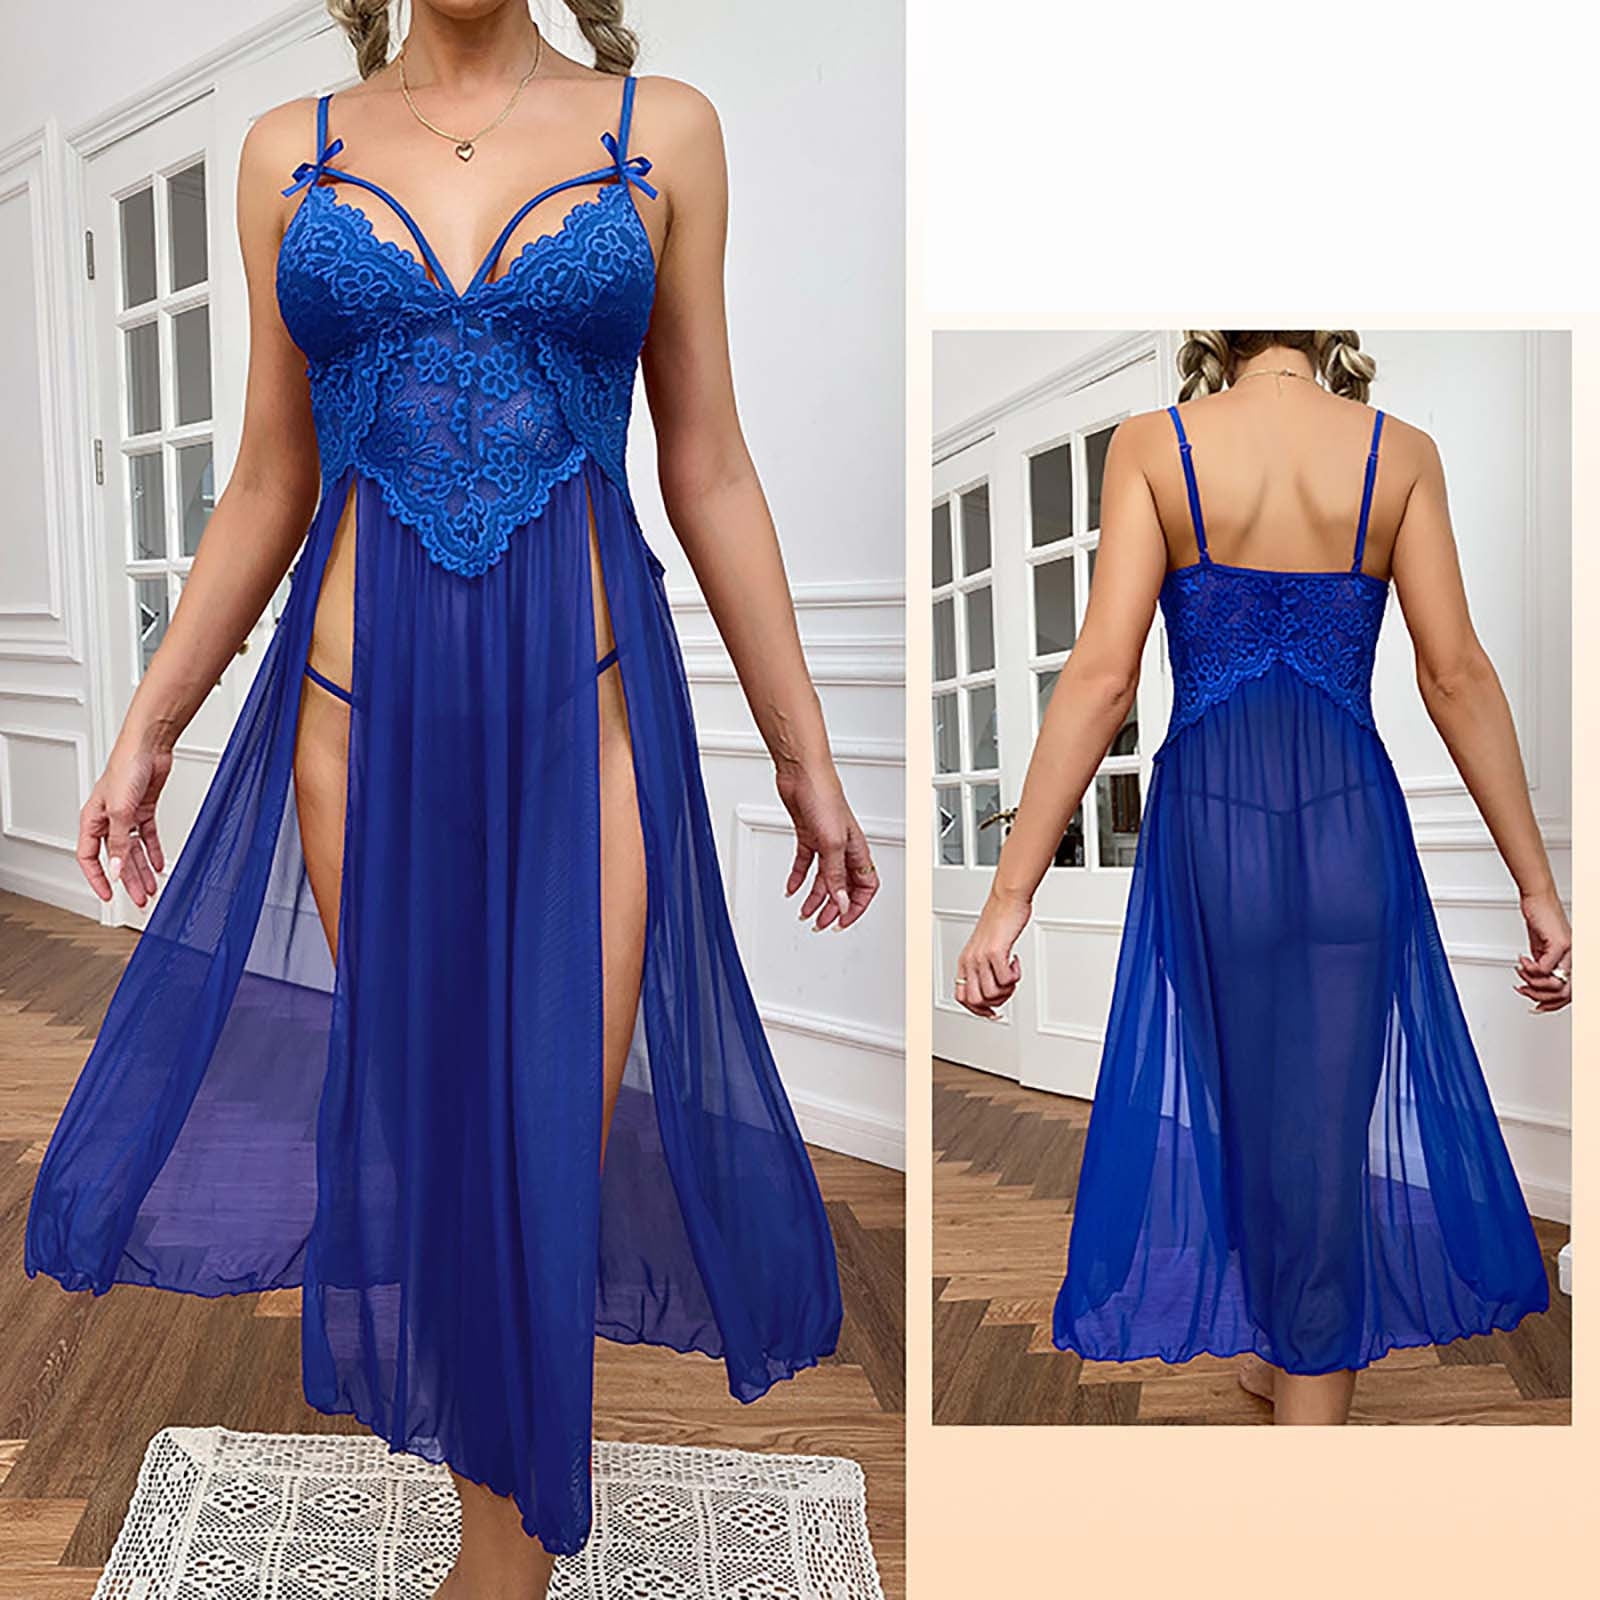 Nightgowns Women Sexy Lace Nightdress Lace Thin Section Deep V Beauty Back  Temptation Sling Sexy Nightdress Sexy Lingerie Y200425 s5Yf#